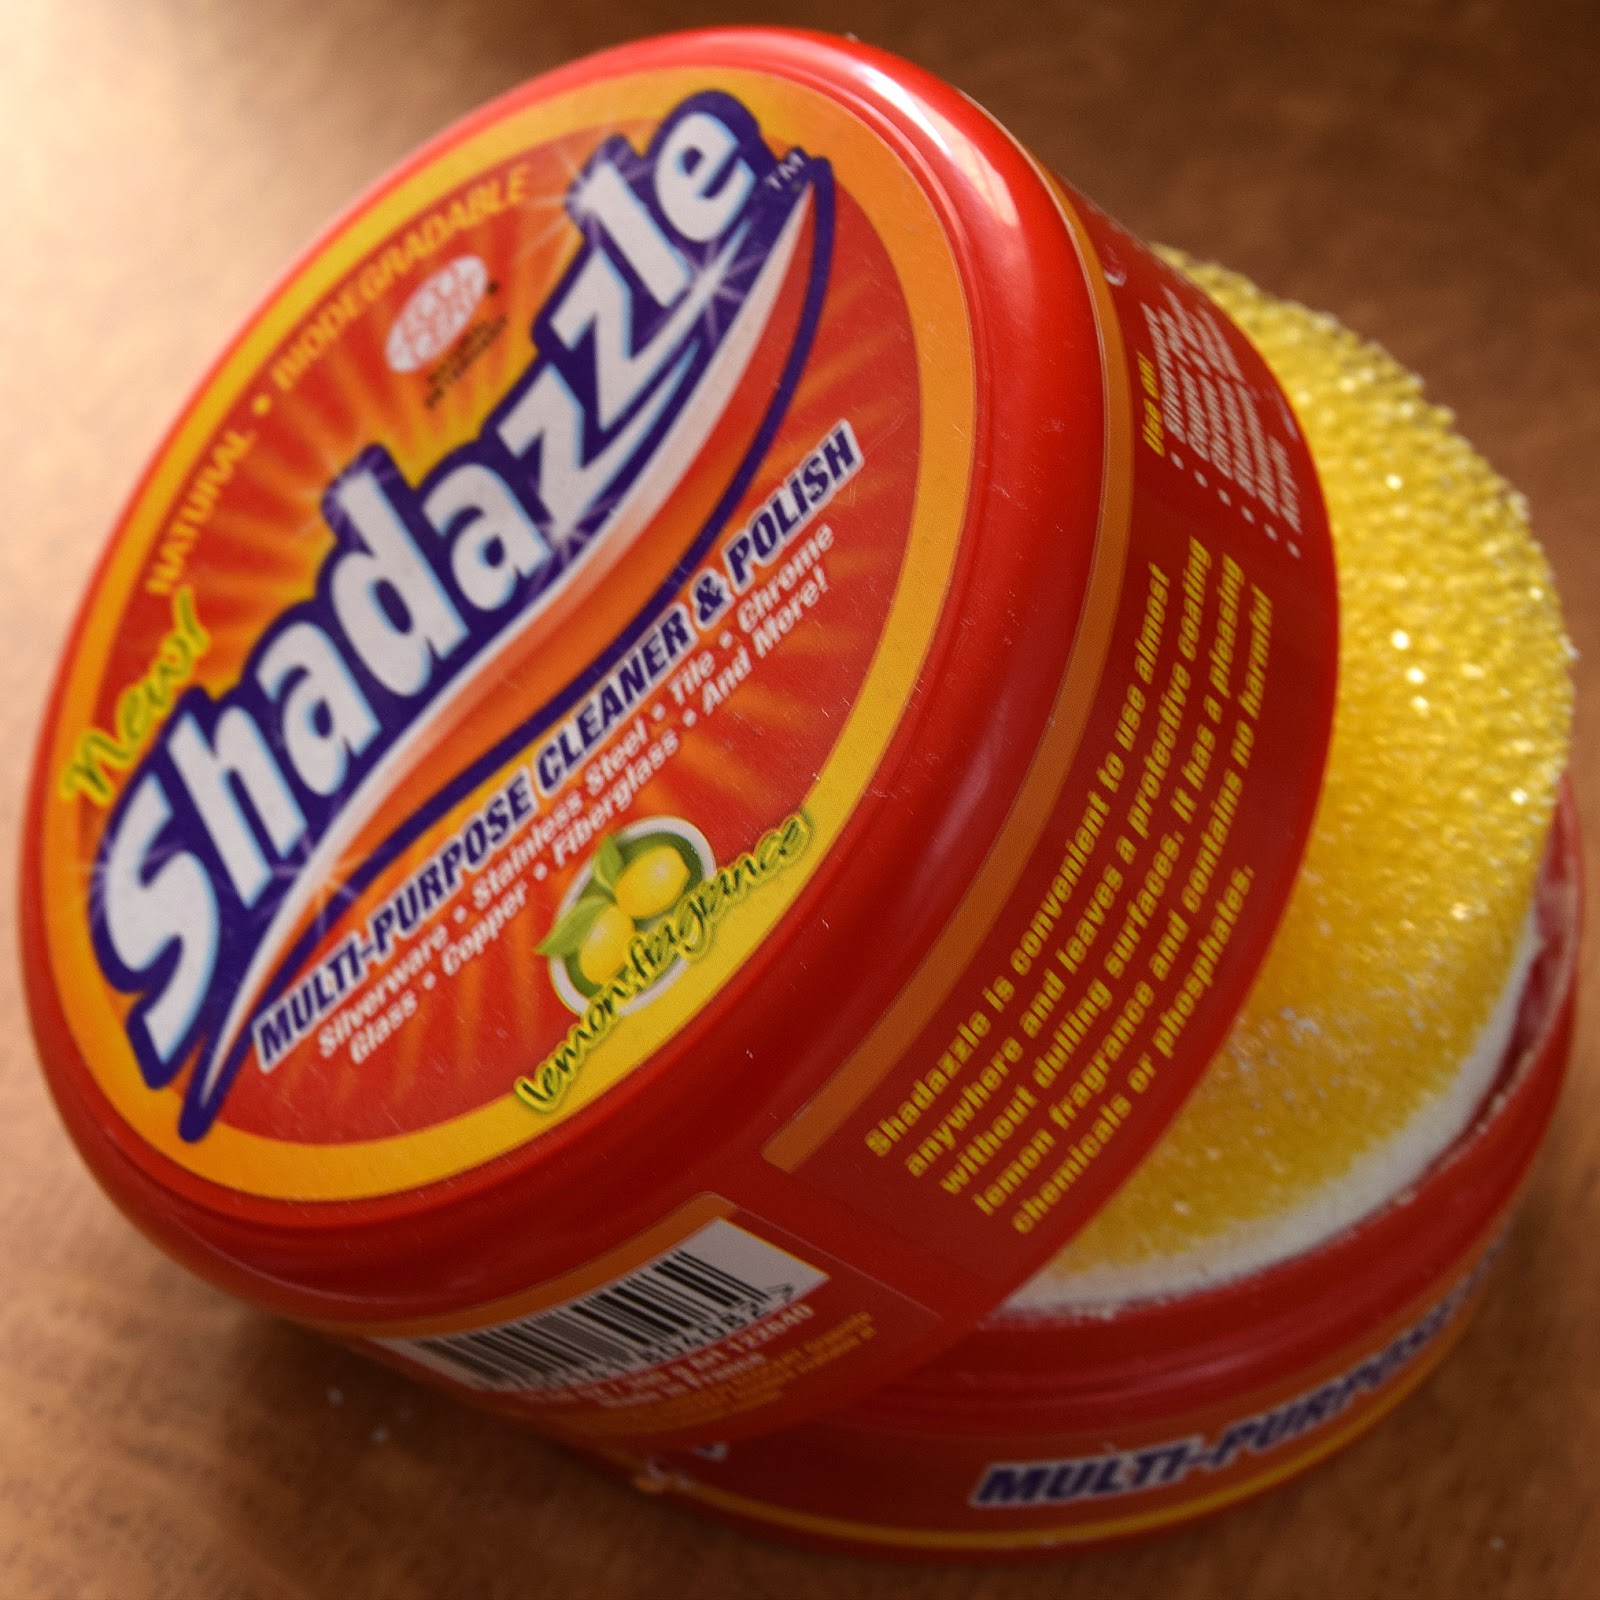 Shadazzle Natural All Purpose Cleaner and Polish review — TODAY